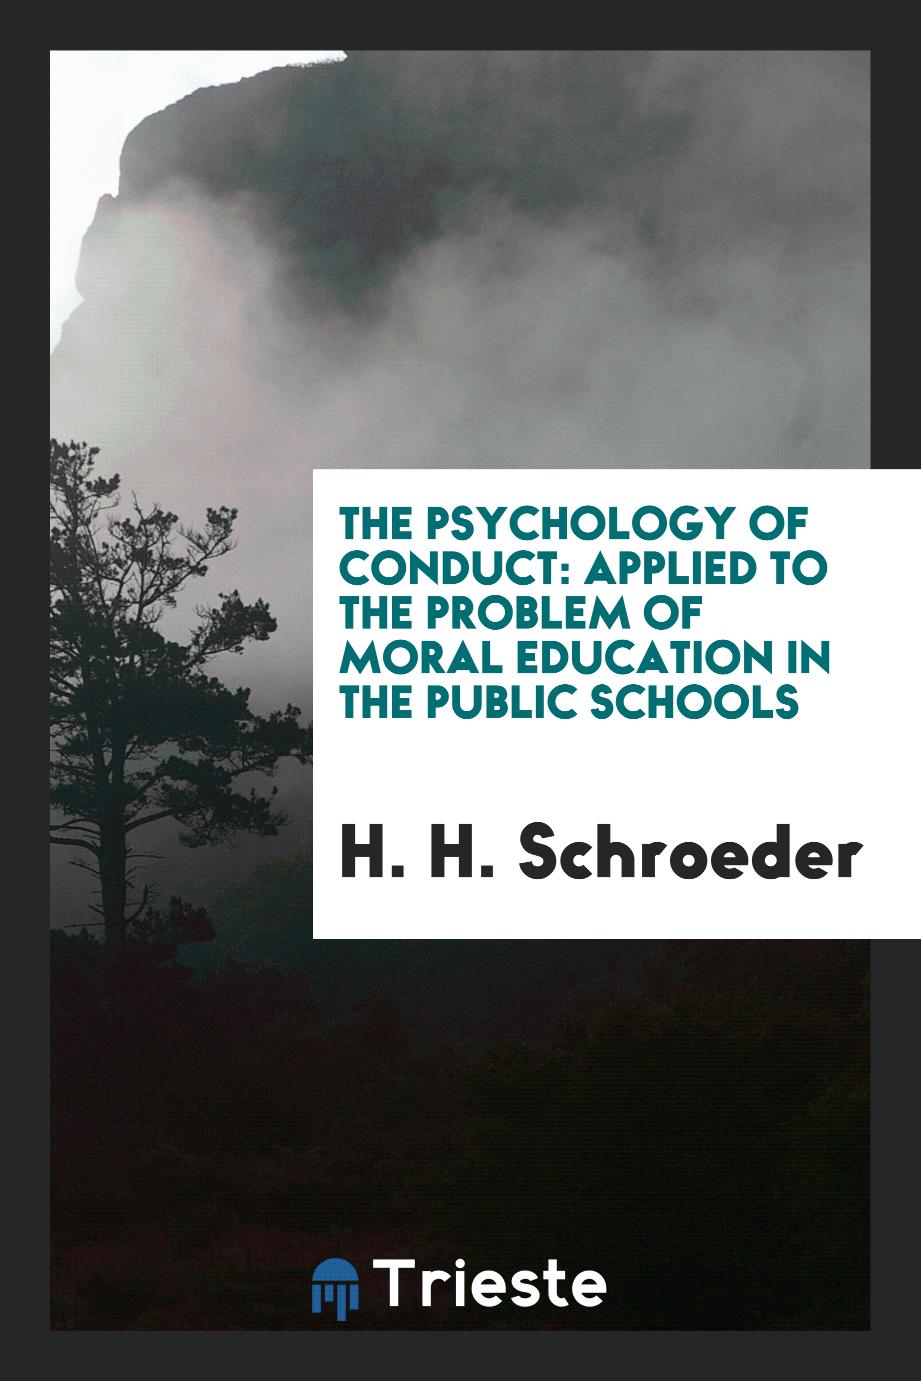 The psychology of conduct: applied to the problem of moral education in the public schools